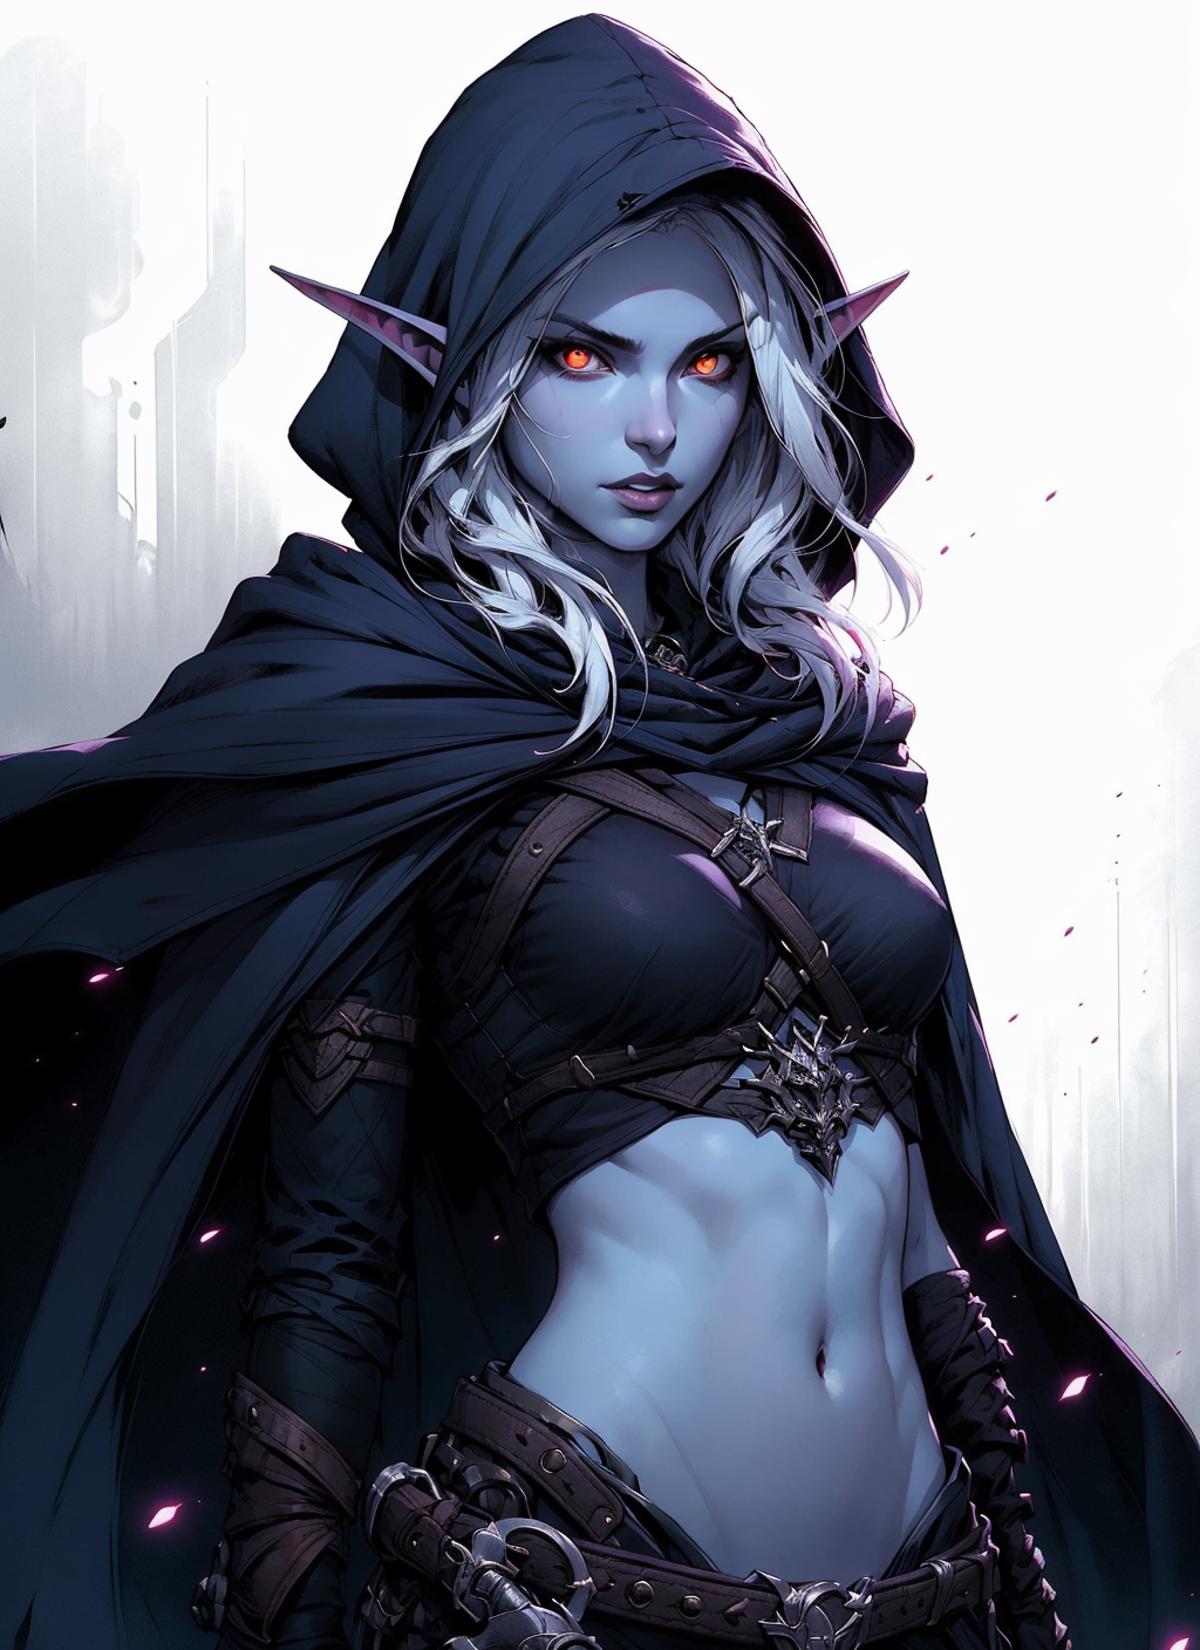 Elf-like character in black and blue attire with red eyes.